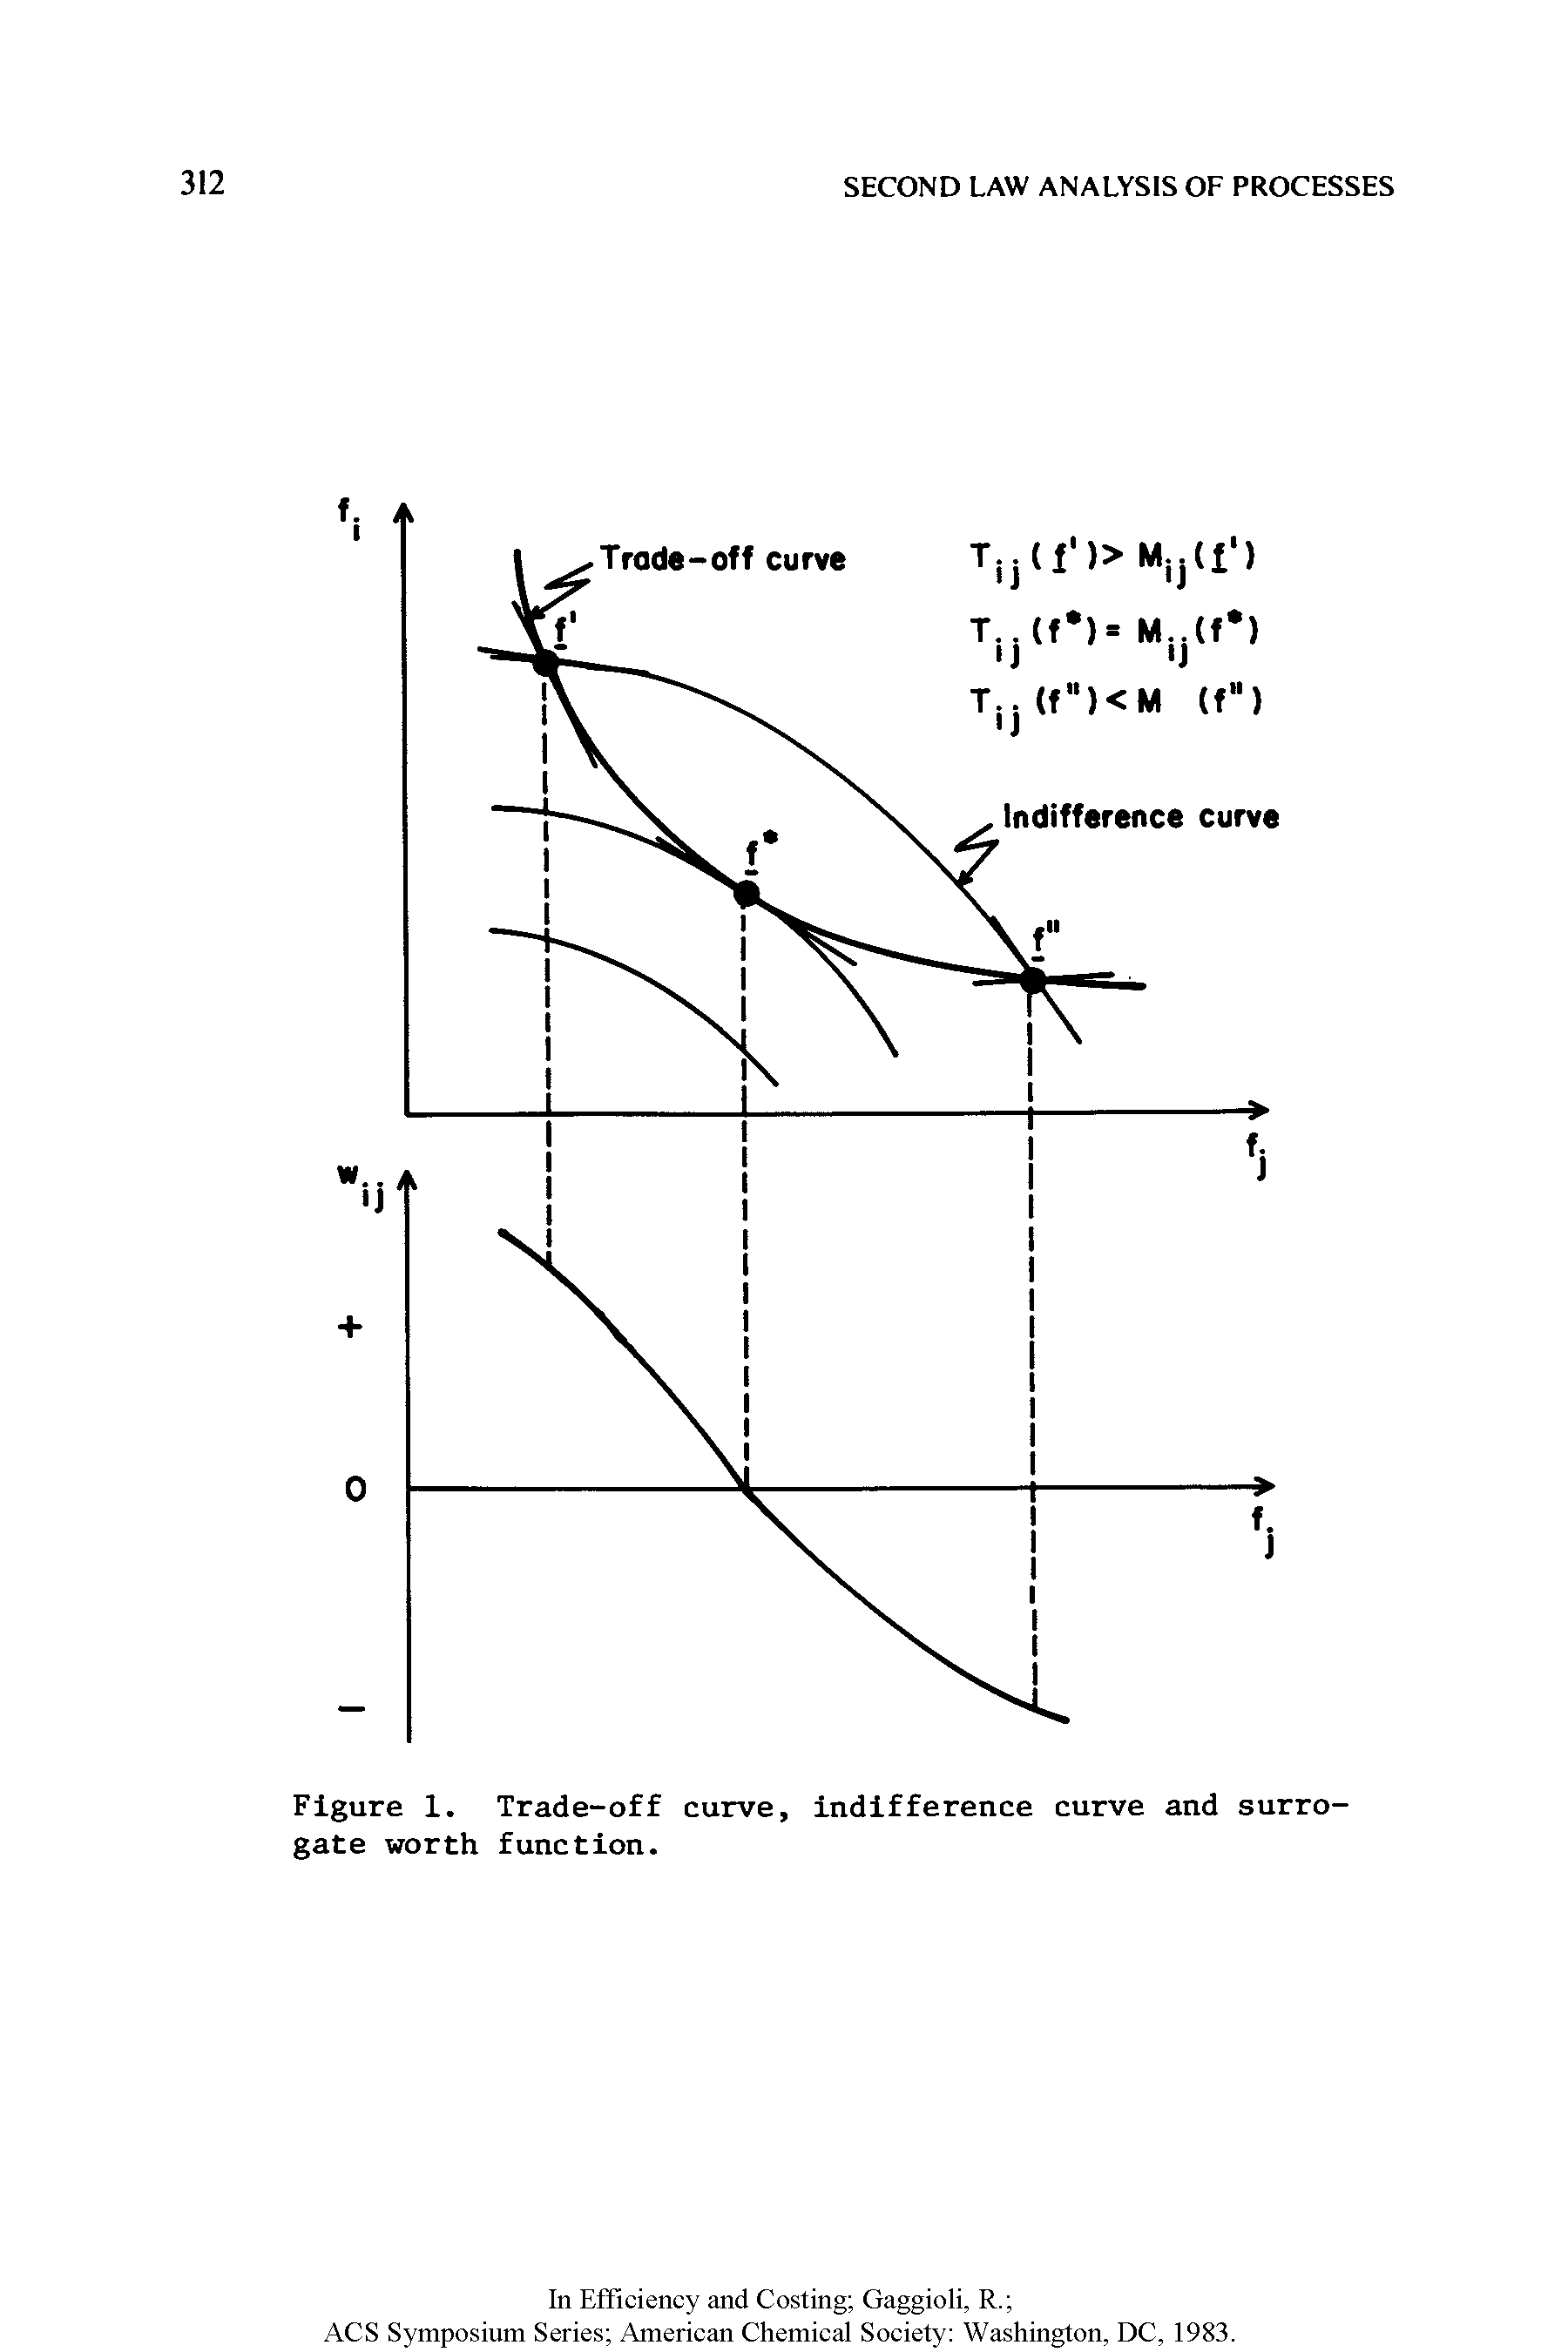 Figure 1. Trade-off curve, indifference curve and surrogate worth function.